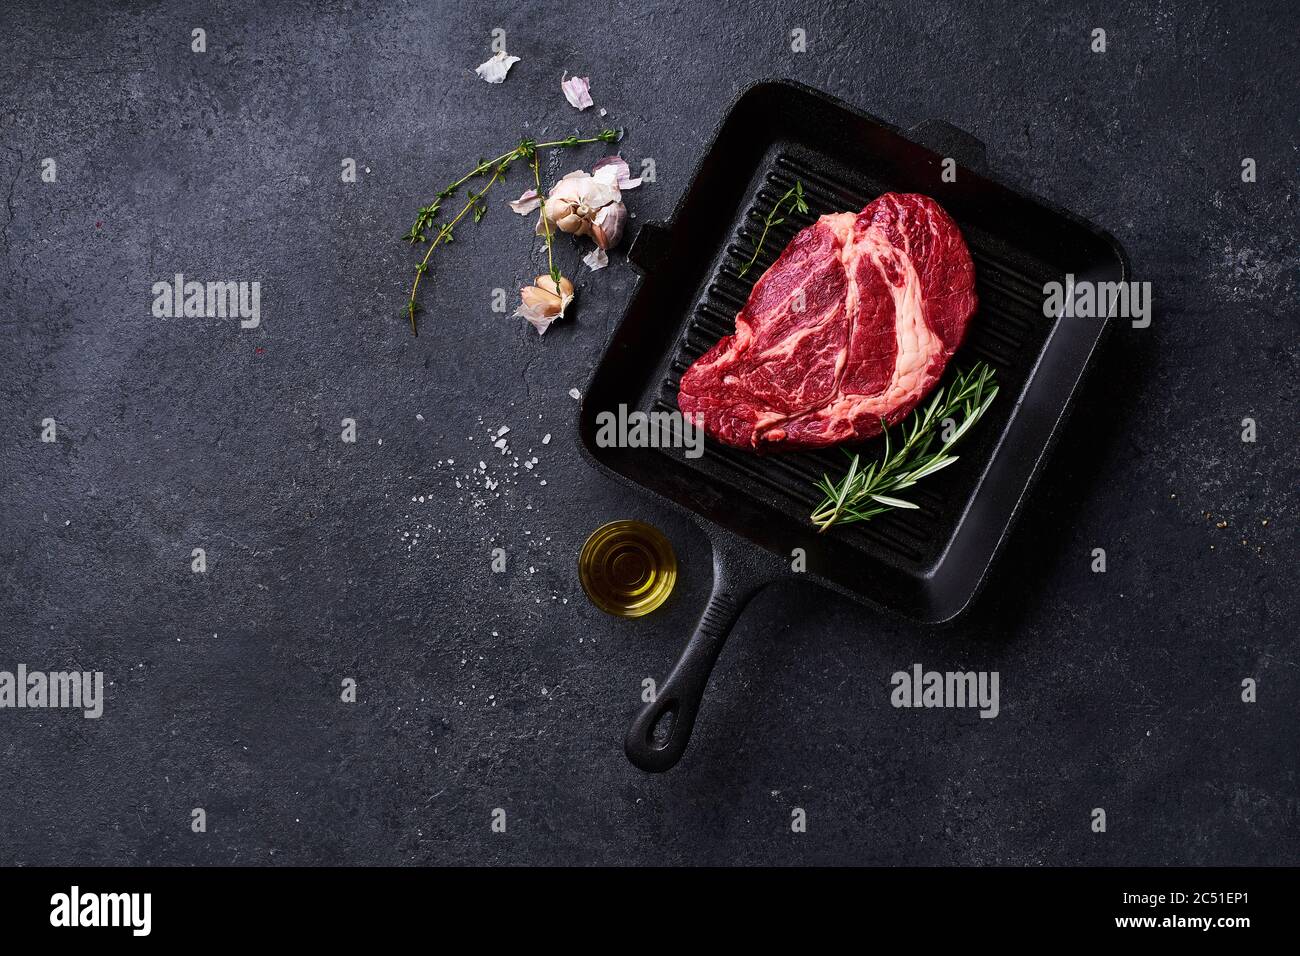 Top view Black Angus prime beef chuck roll  steak on cast iron grill pan with fresh rosemary, thyme, olive oil, garlic and spices. Creative layout wit Stock Photo